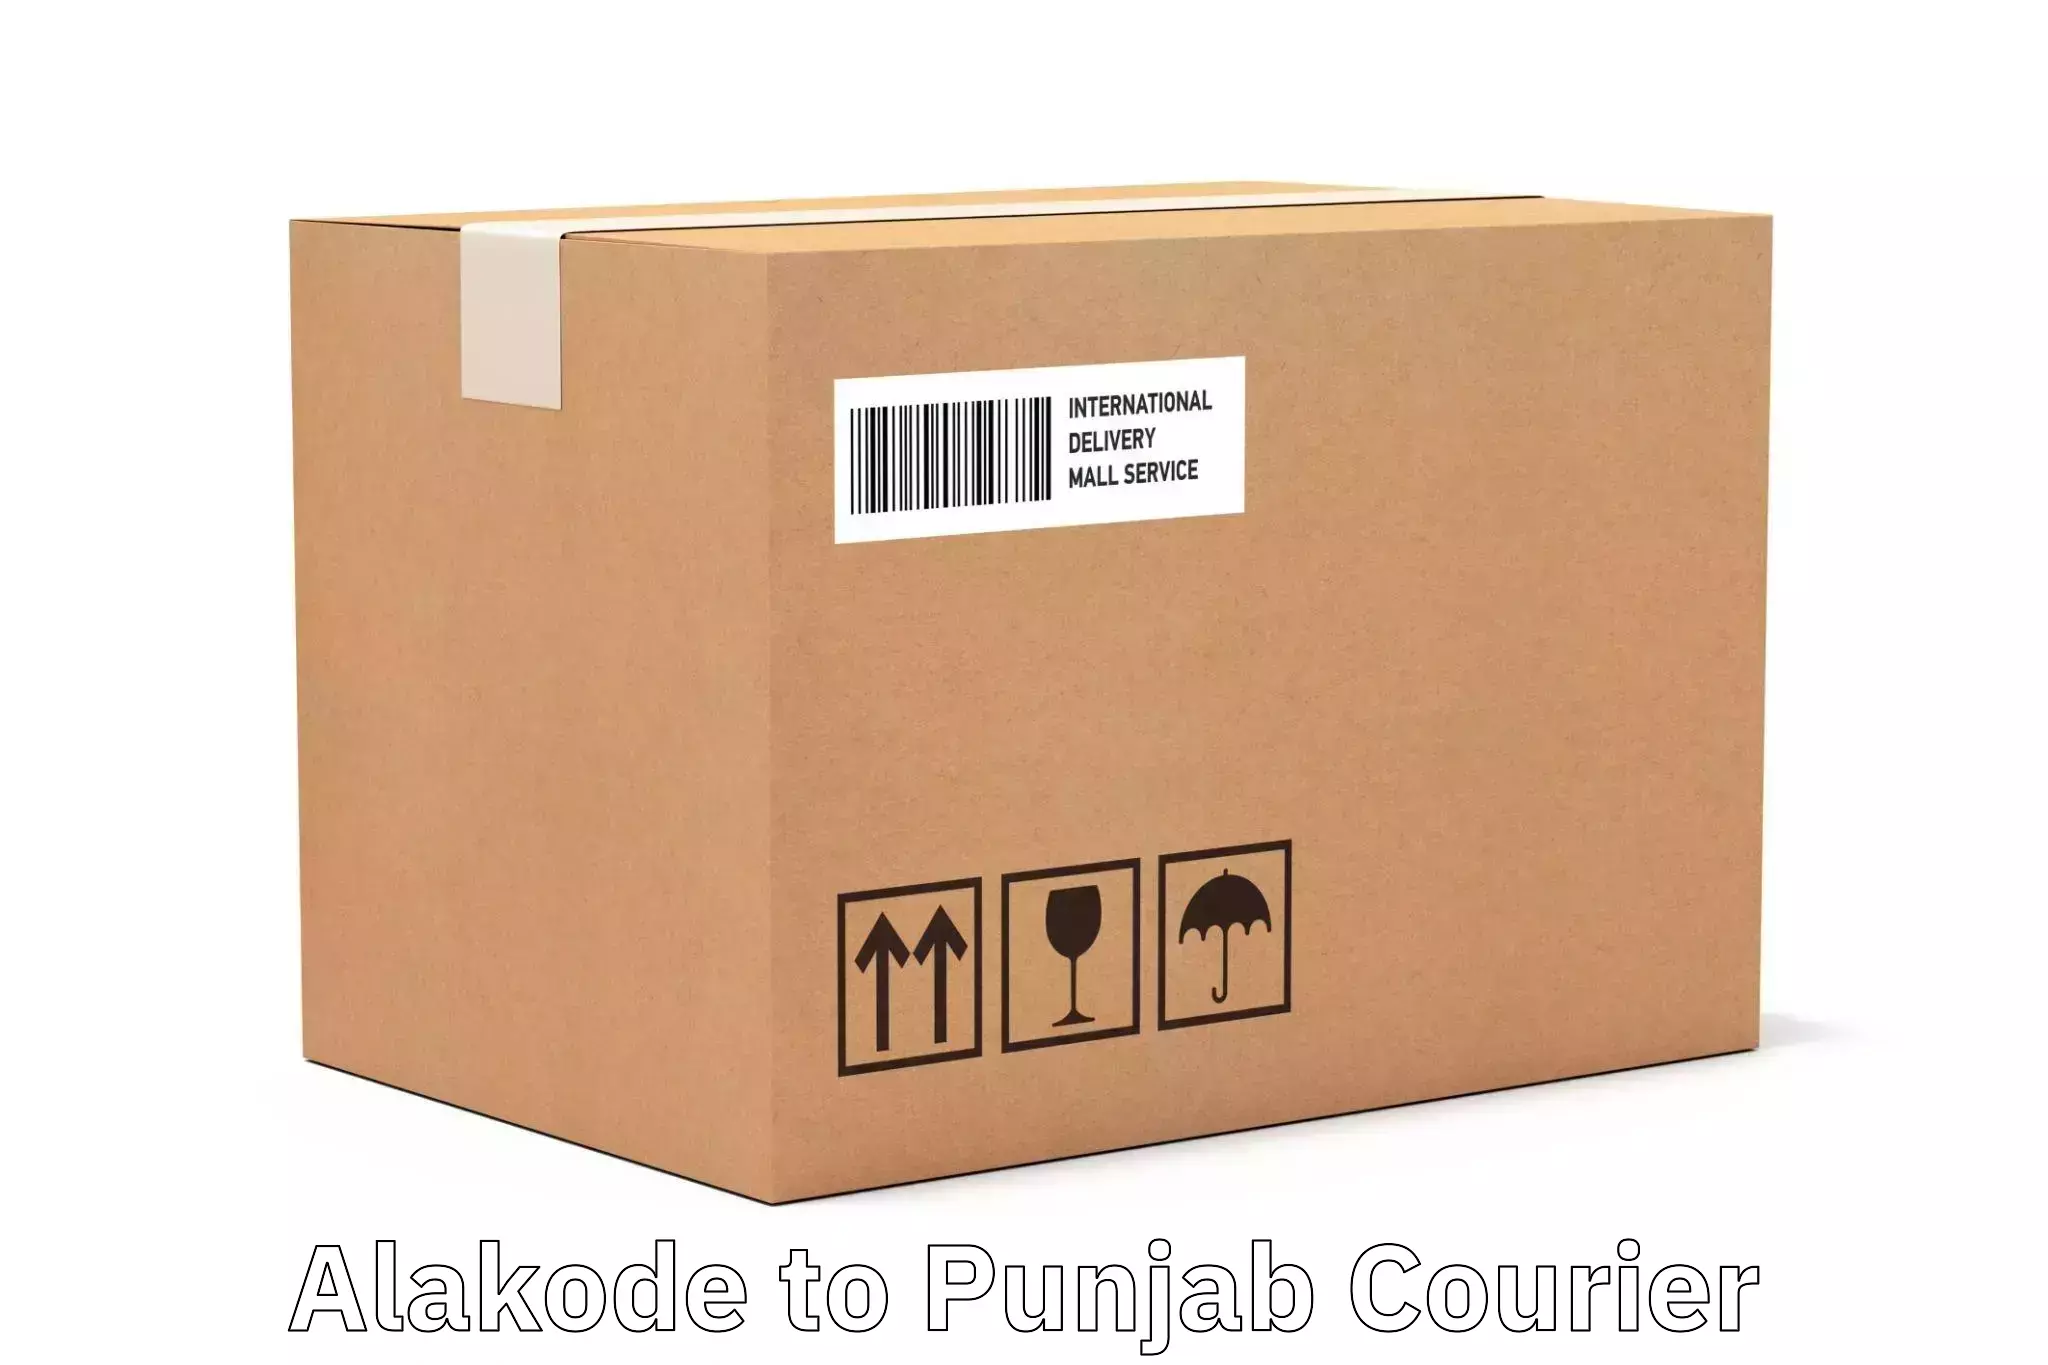 Discounted shipping Alakode to Sirhind Fatehgarh